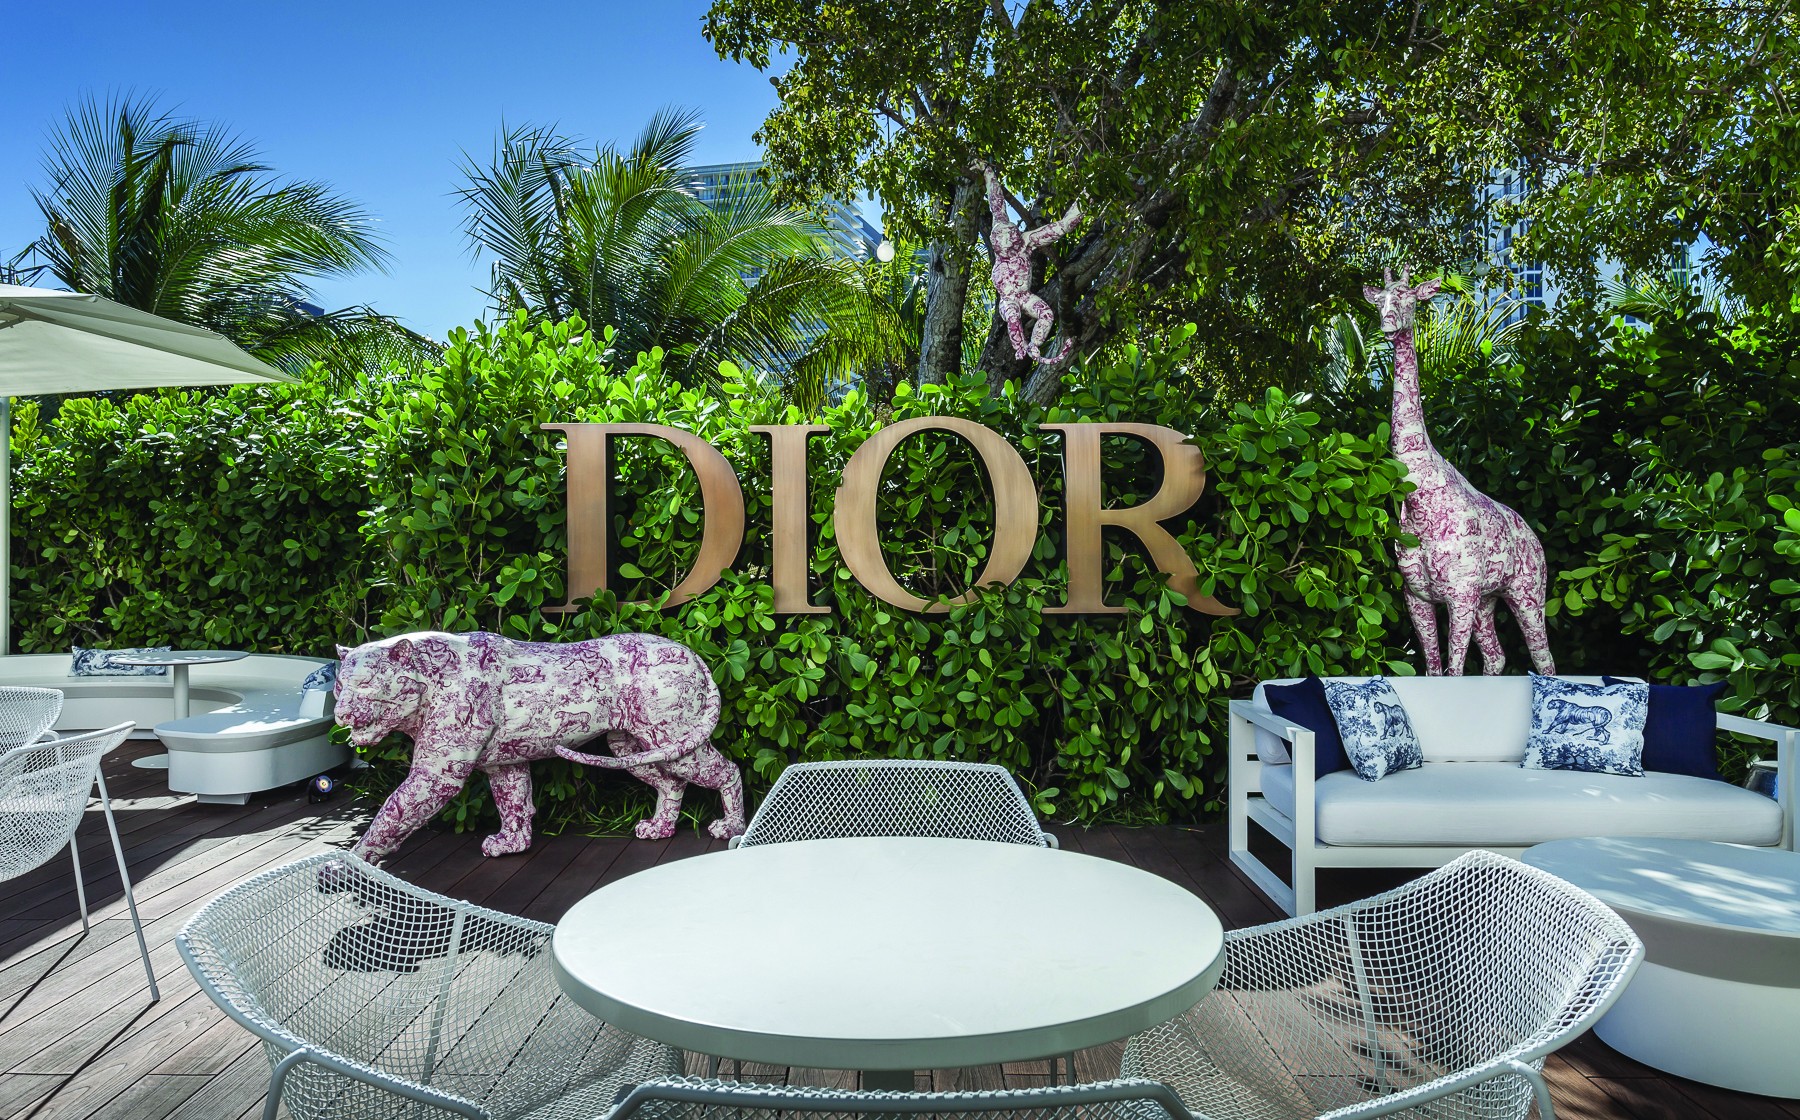 A total dior experience in their new very instagrammable cafe  see  more in Stories    Miami outfits Miami pictures Miami travel